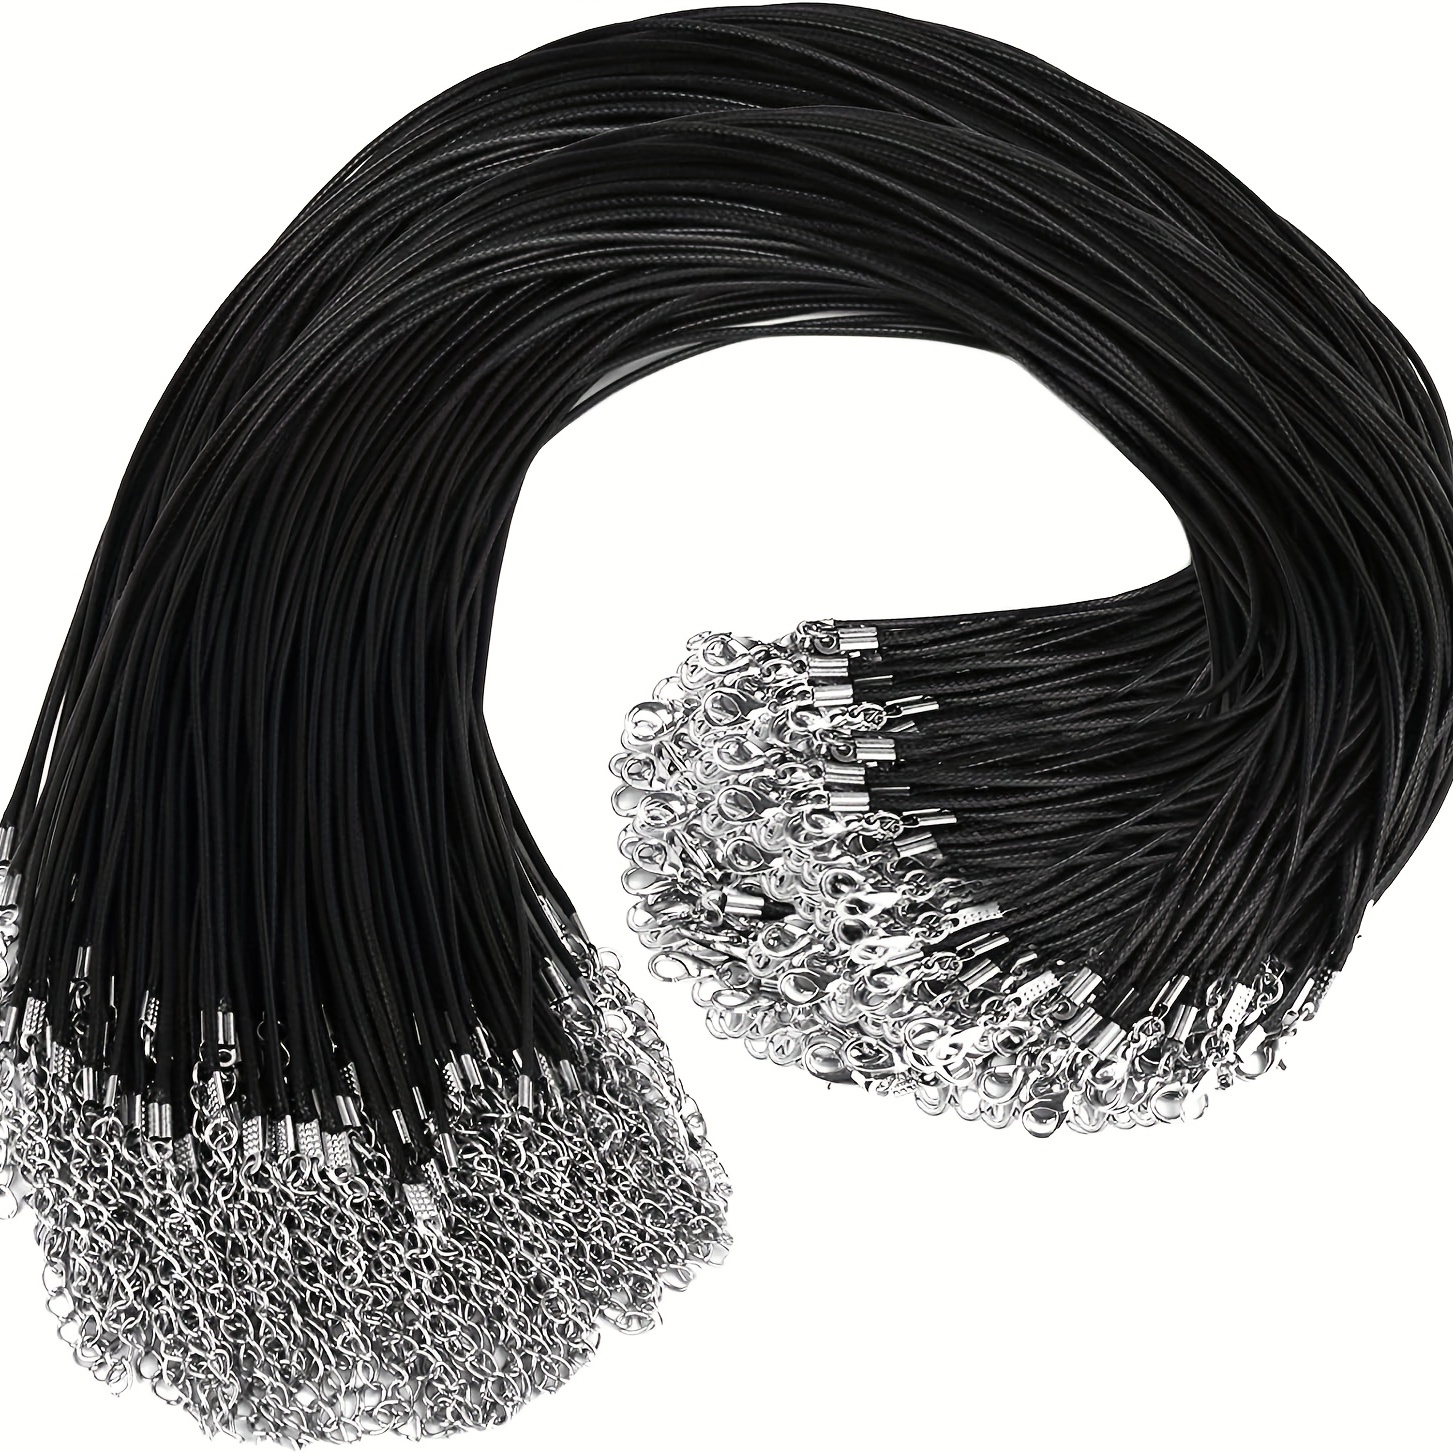 Black Satin Silk Necklace Cord [2 Pack - 18 & 24 Inch] Woven Chain Rope  with Silver Clasp for Women Girls Jewelry Pendants